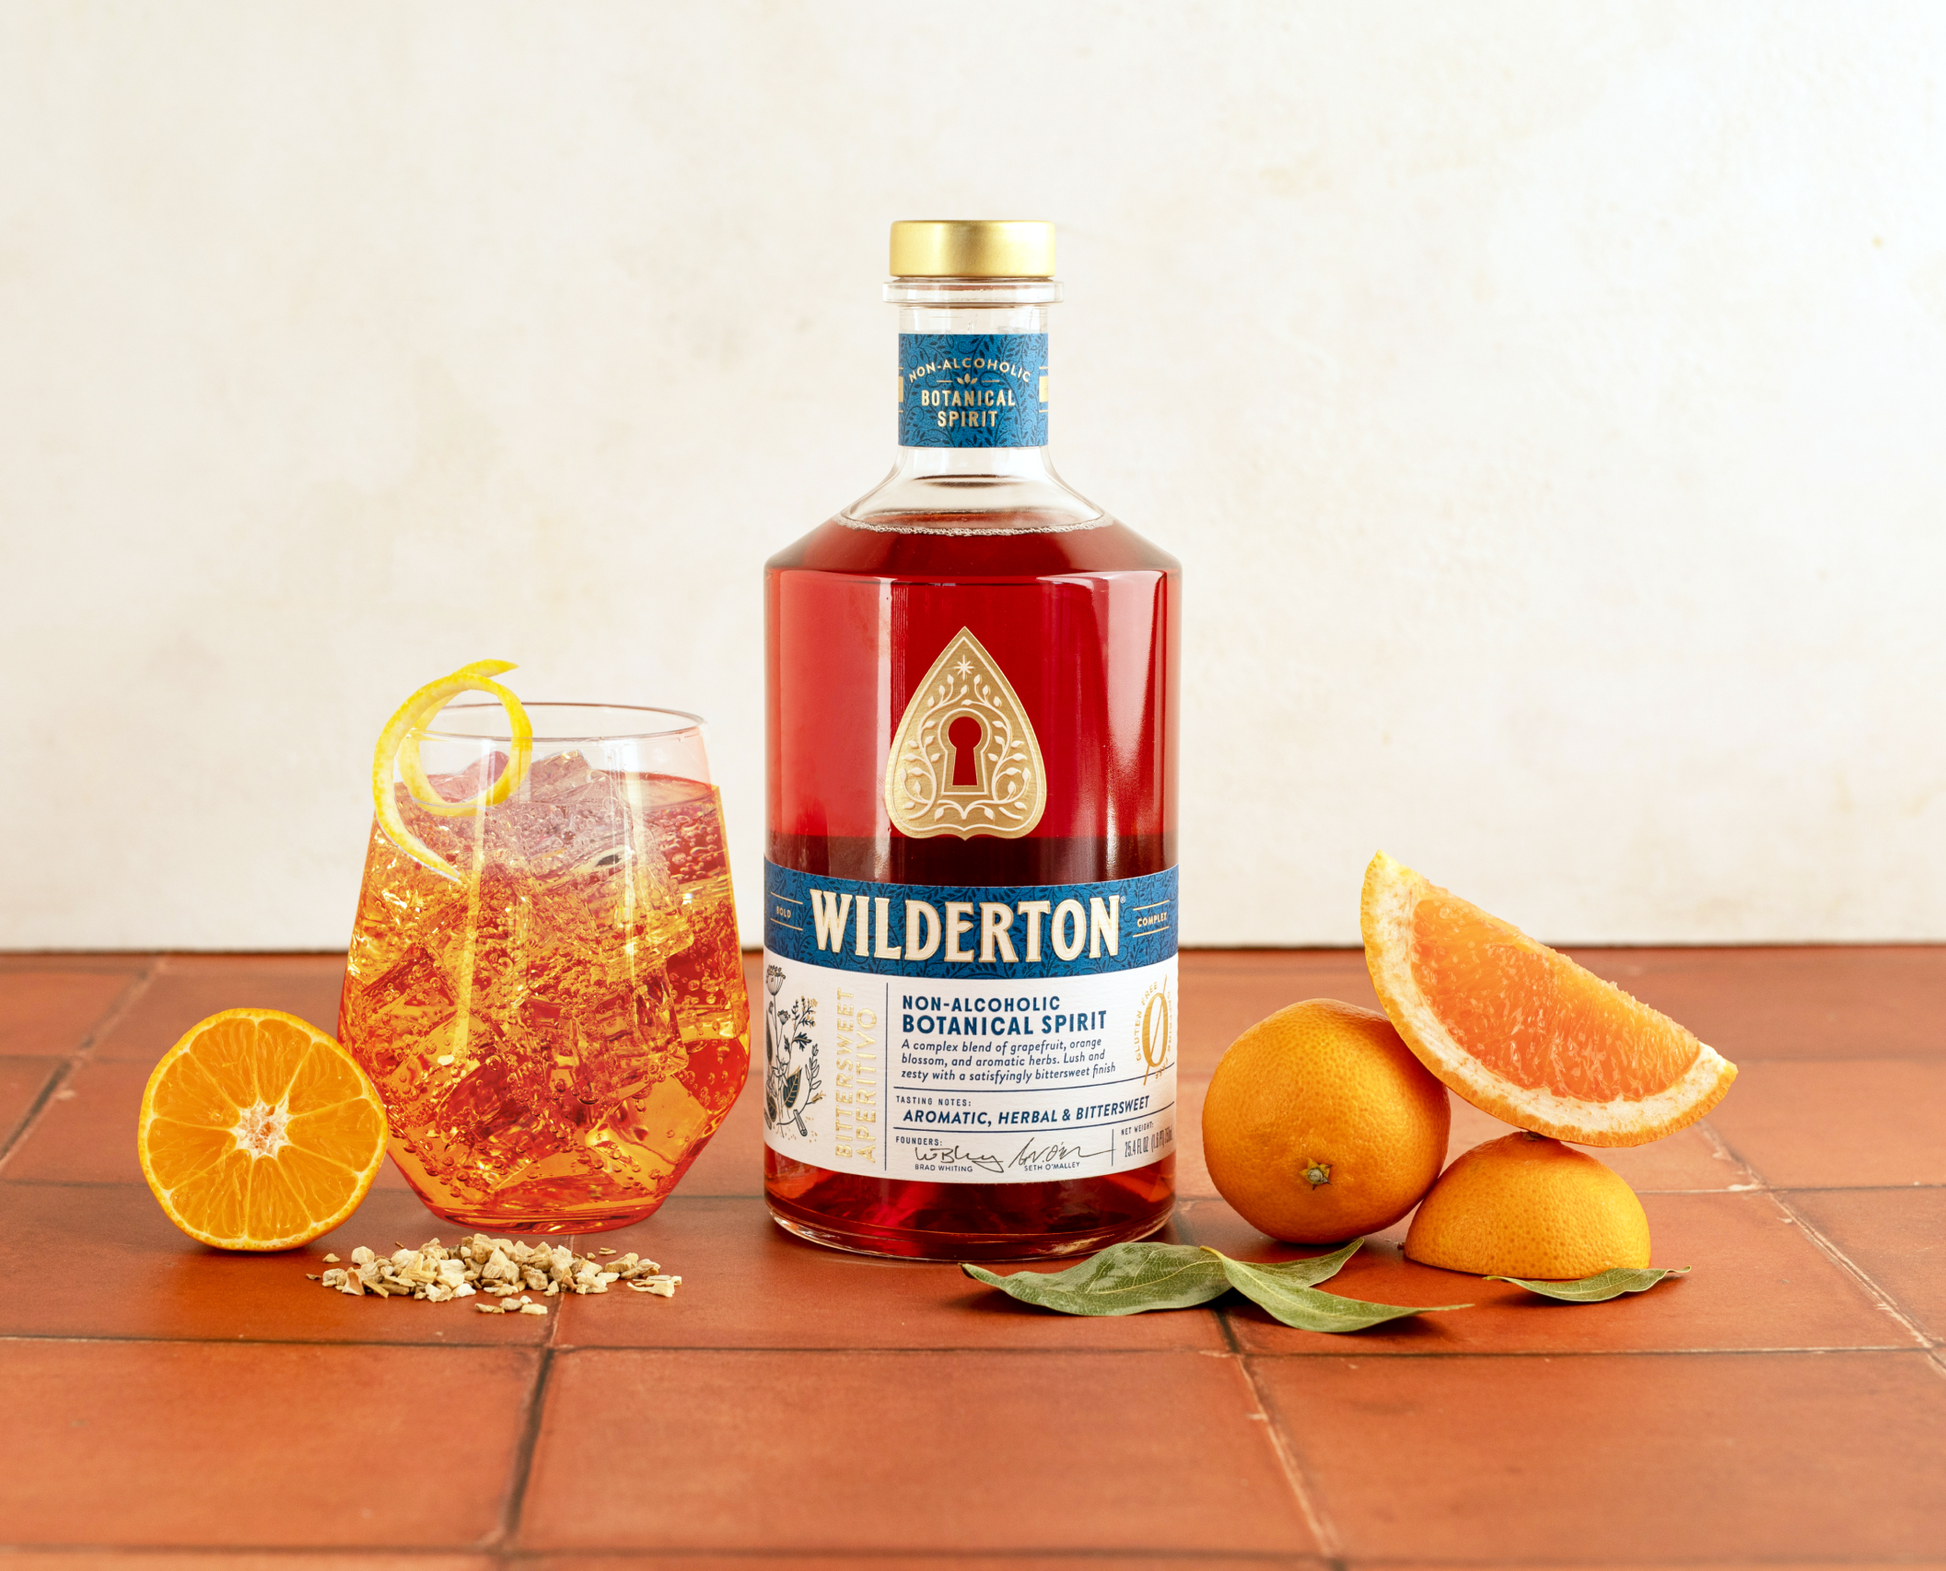 bottles of bittersweet aperitivo next to a glass of wilderton spritz and oranges